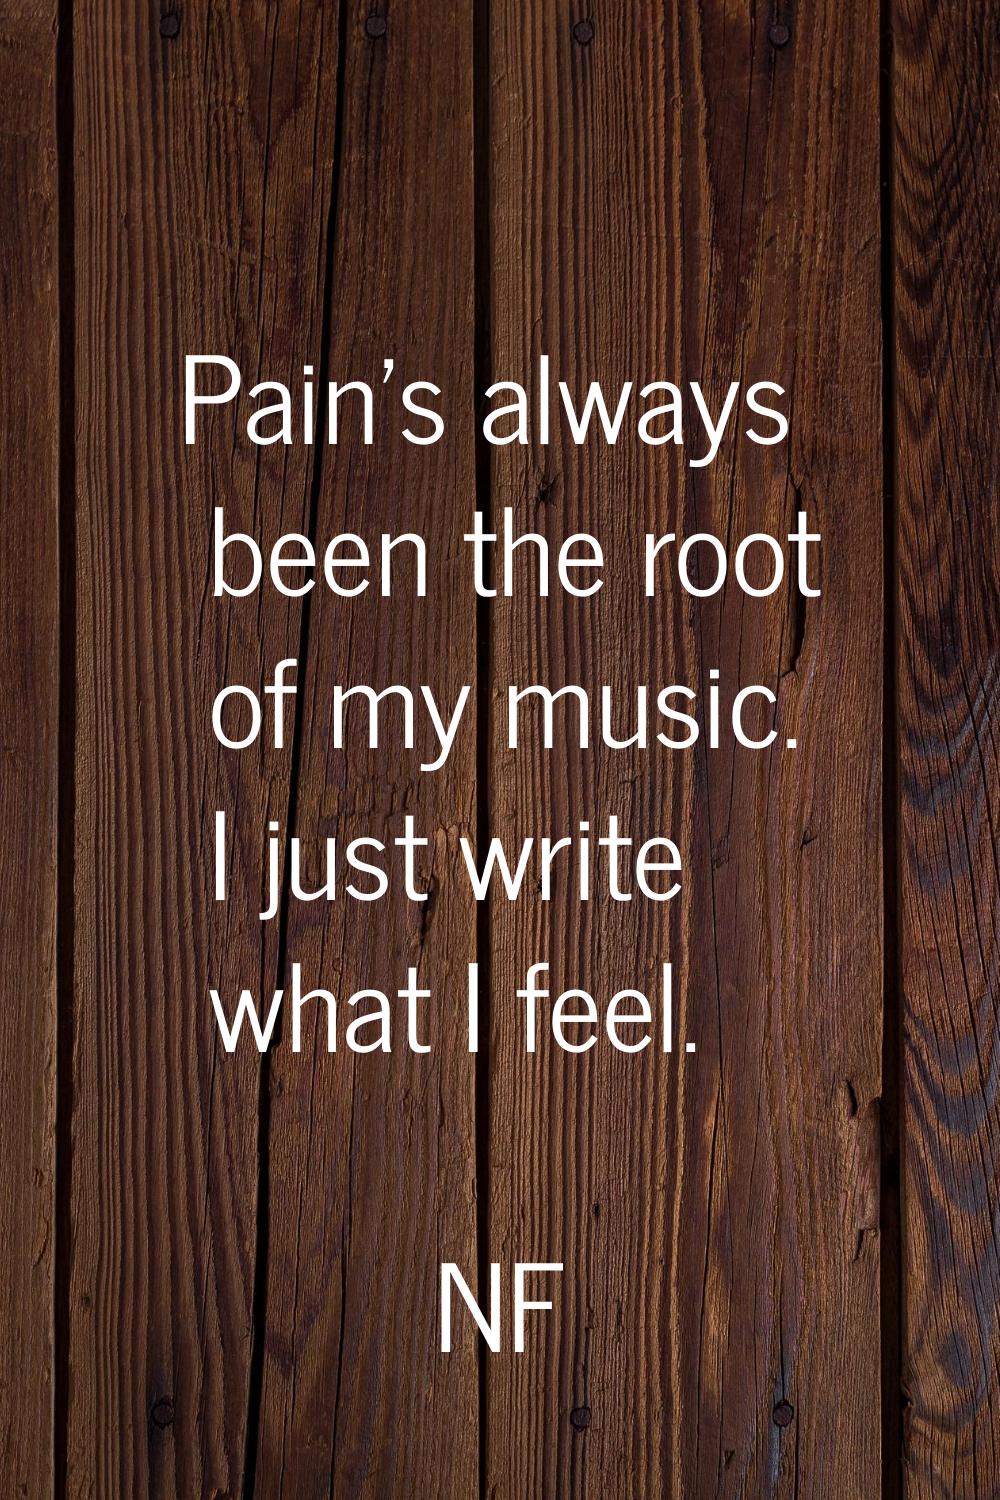 Pain's always been the root of my music. I just write what I feel.